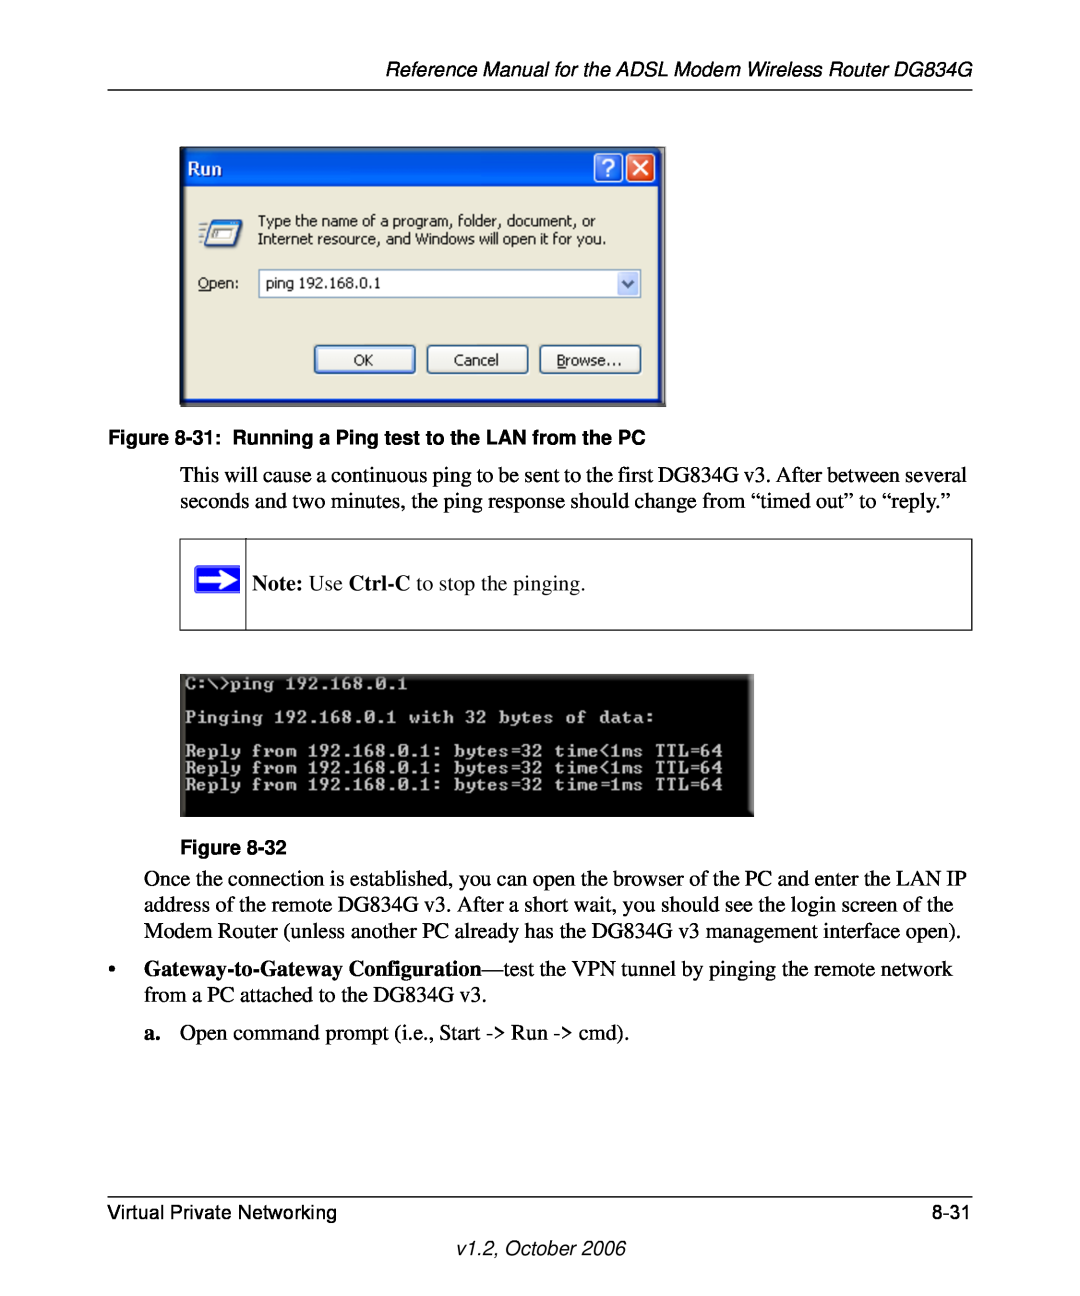 NETGEAR DG834G manual Note Use Ctrl-C to stop the pinging, a. Open command prompt i.e., Start - Run - cmd 